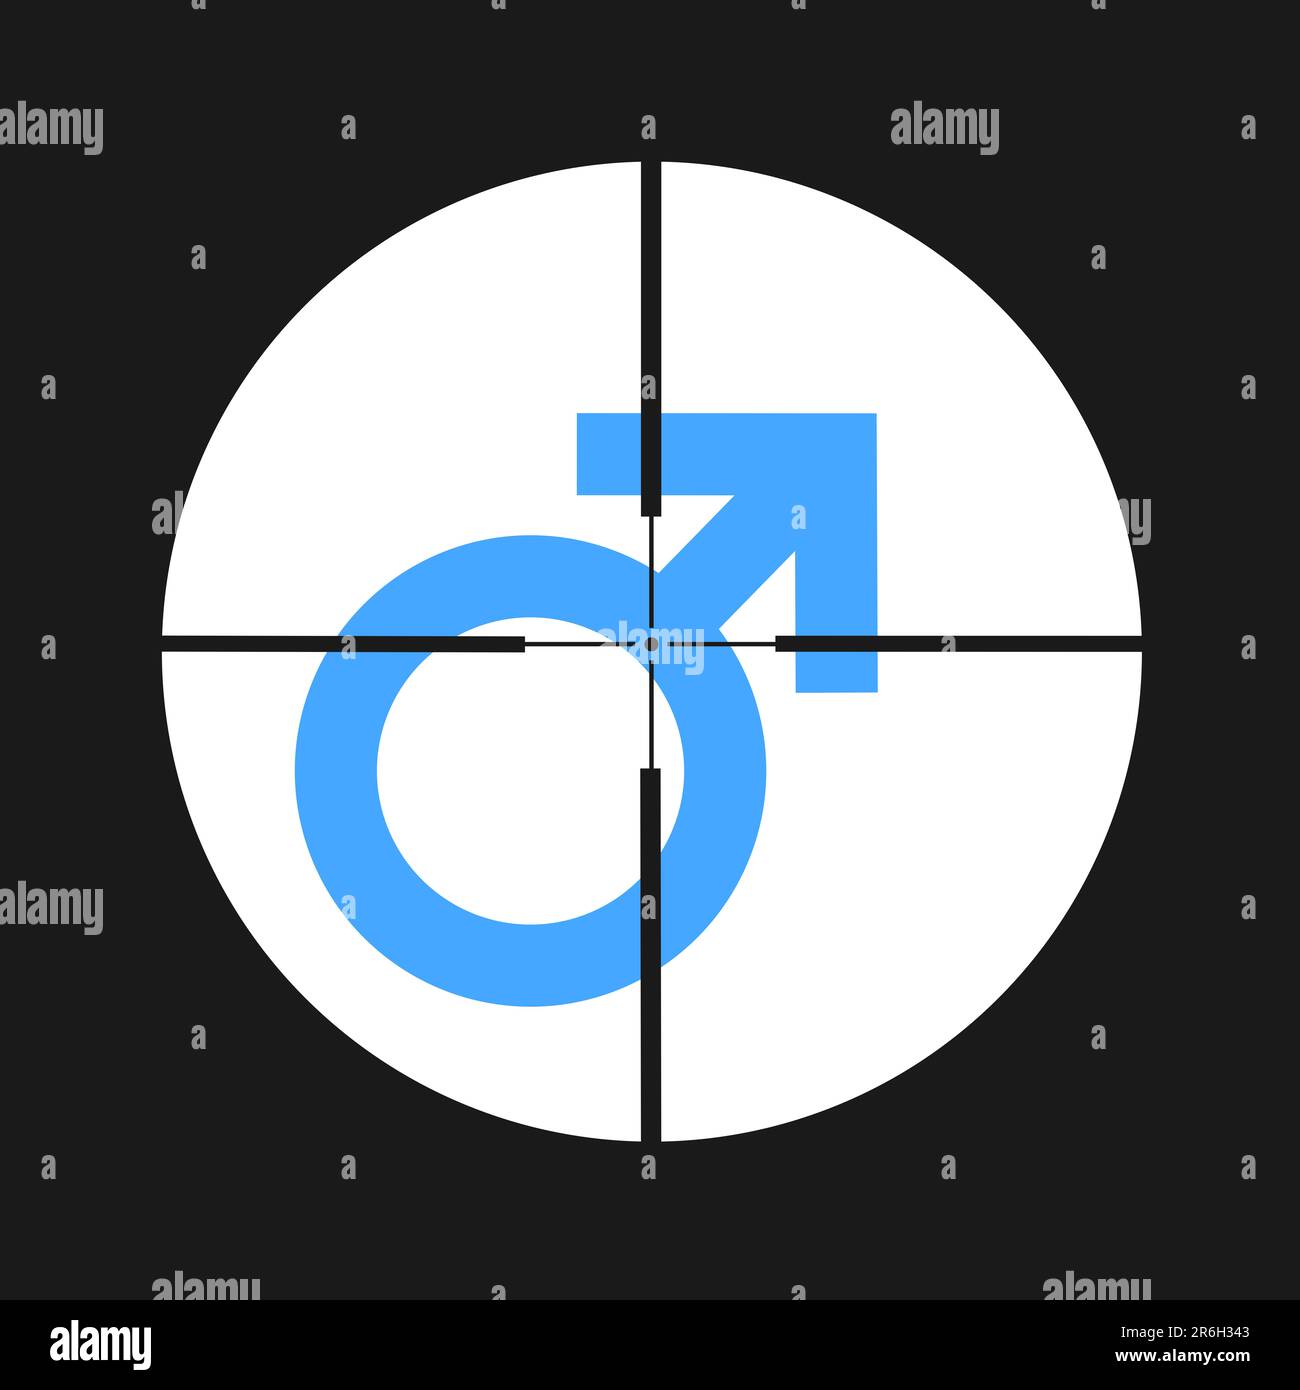 Misandry - Gunsight targetting on male sex symbol as metaphor of man being under sexist and offensive attack and assault based on sex and gender. Vect Stock Photo